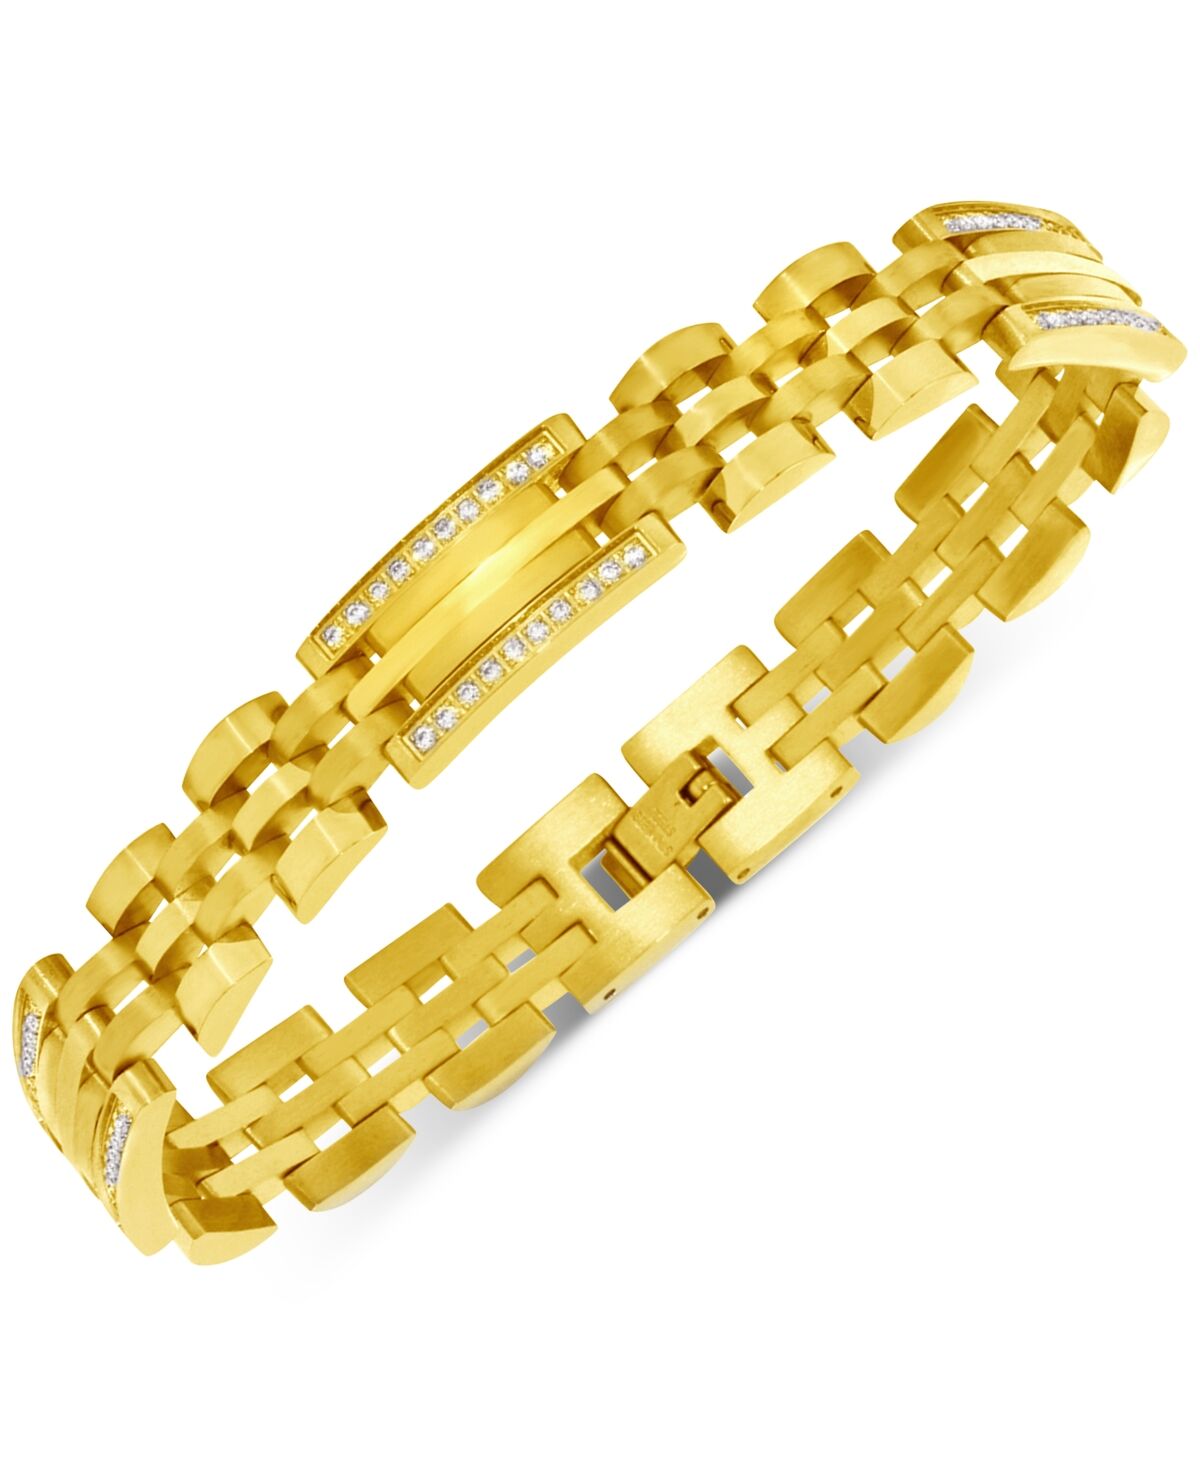 Macy's Men's Diamond Two-Tone Link Bracelet (1/2 ct. t.w.) in Stainless Steel and Yellow Ion-Plate - Gold Tone